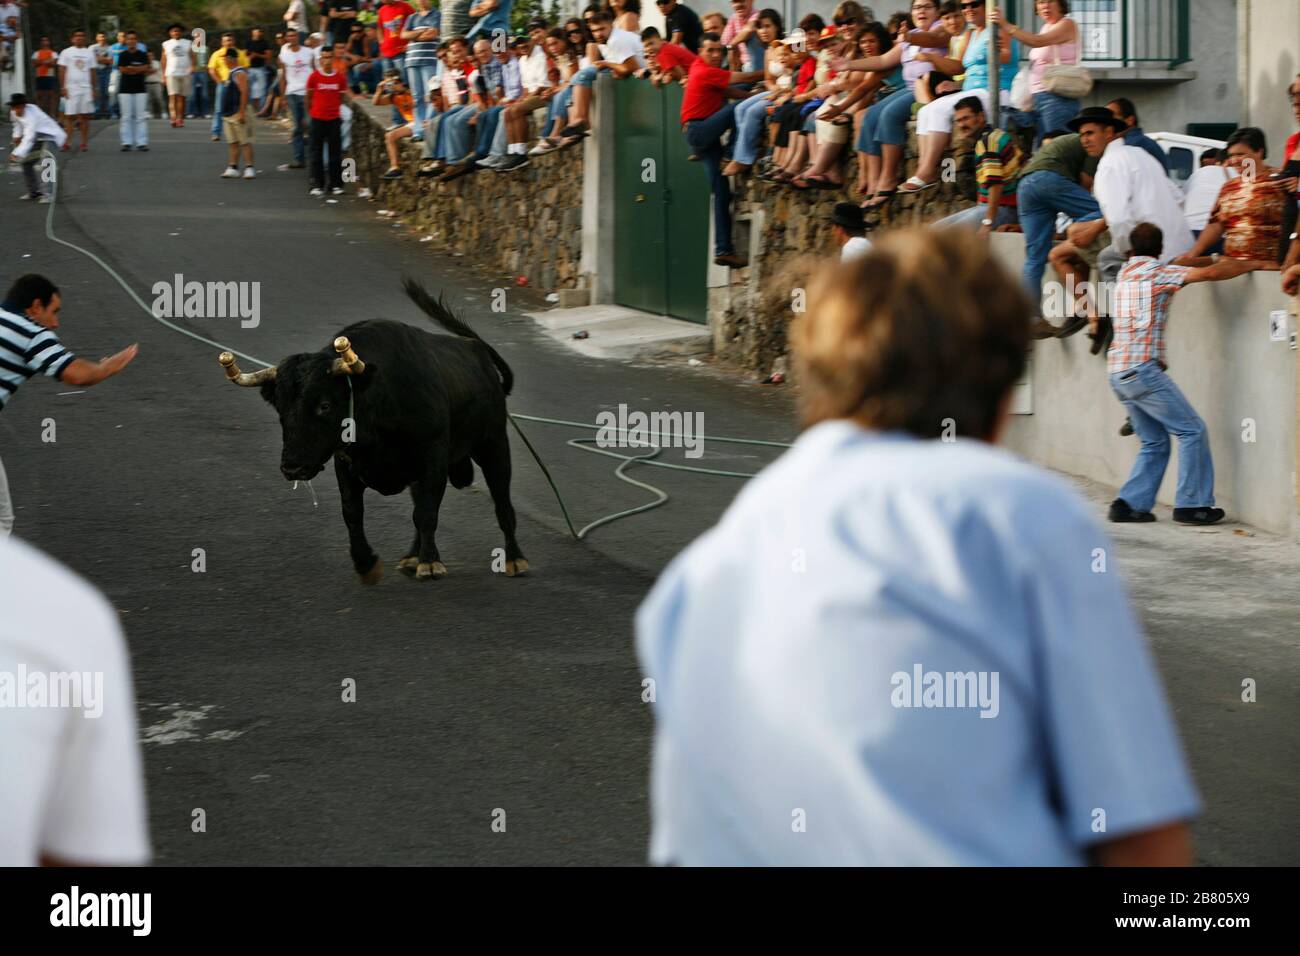 Tourada a corda, traditional fiesta in Terceira island. Bulls with a rope managed by shepherds in villages all around island. Açores islands, Portugal. Stock Photo